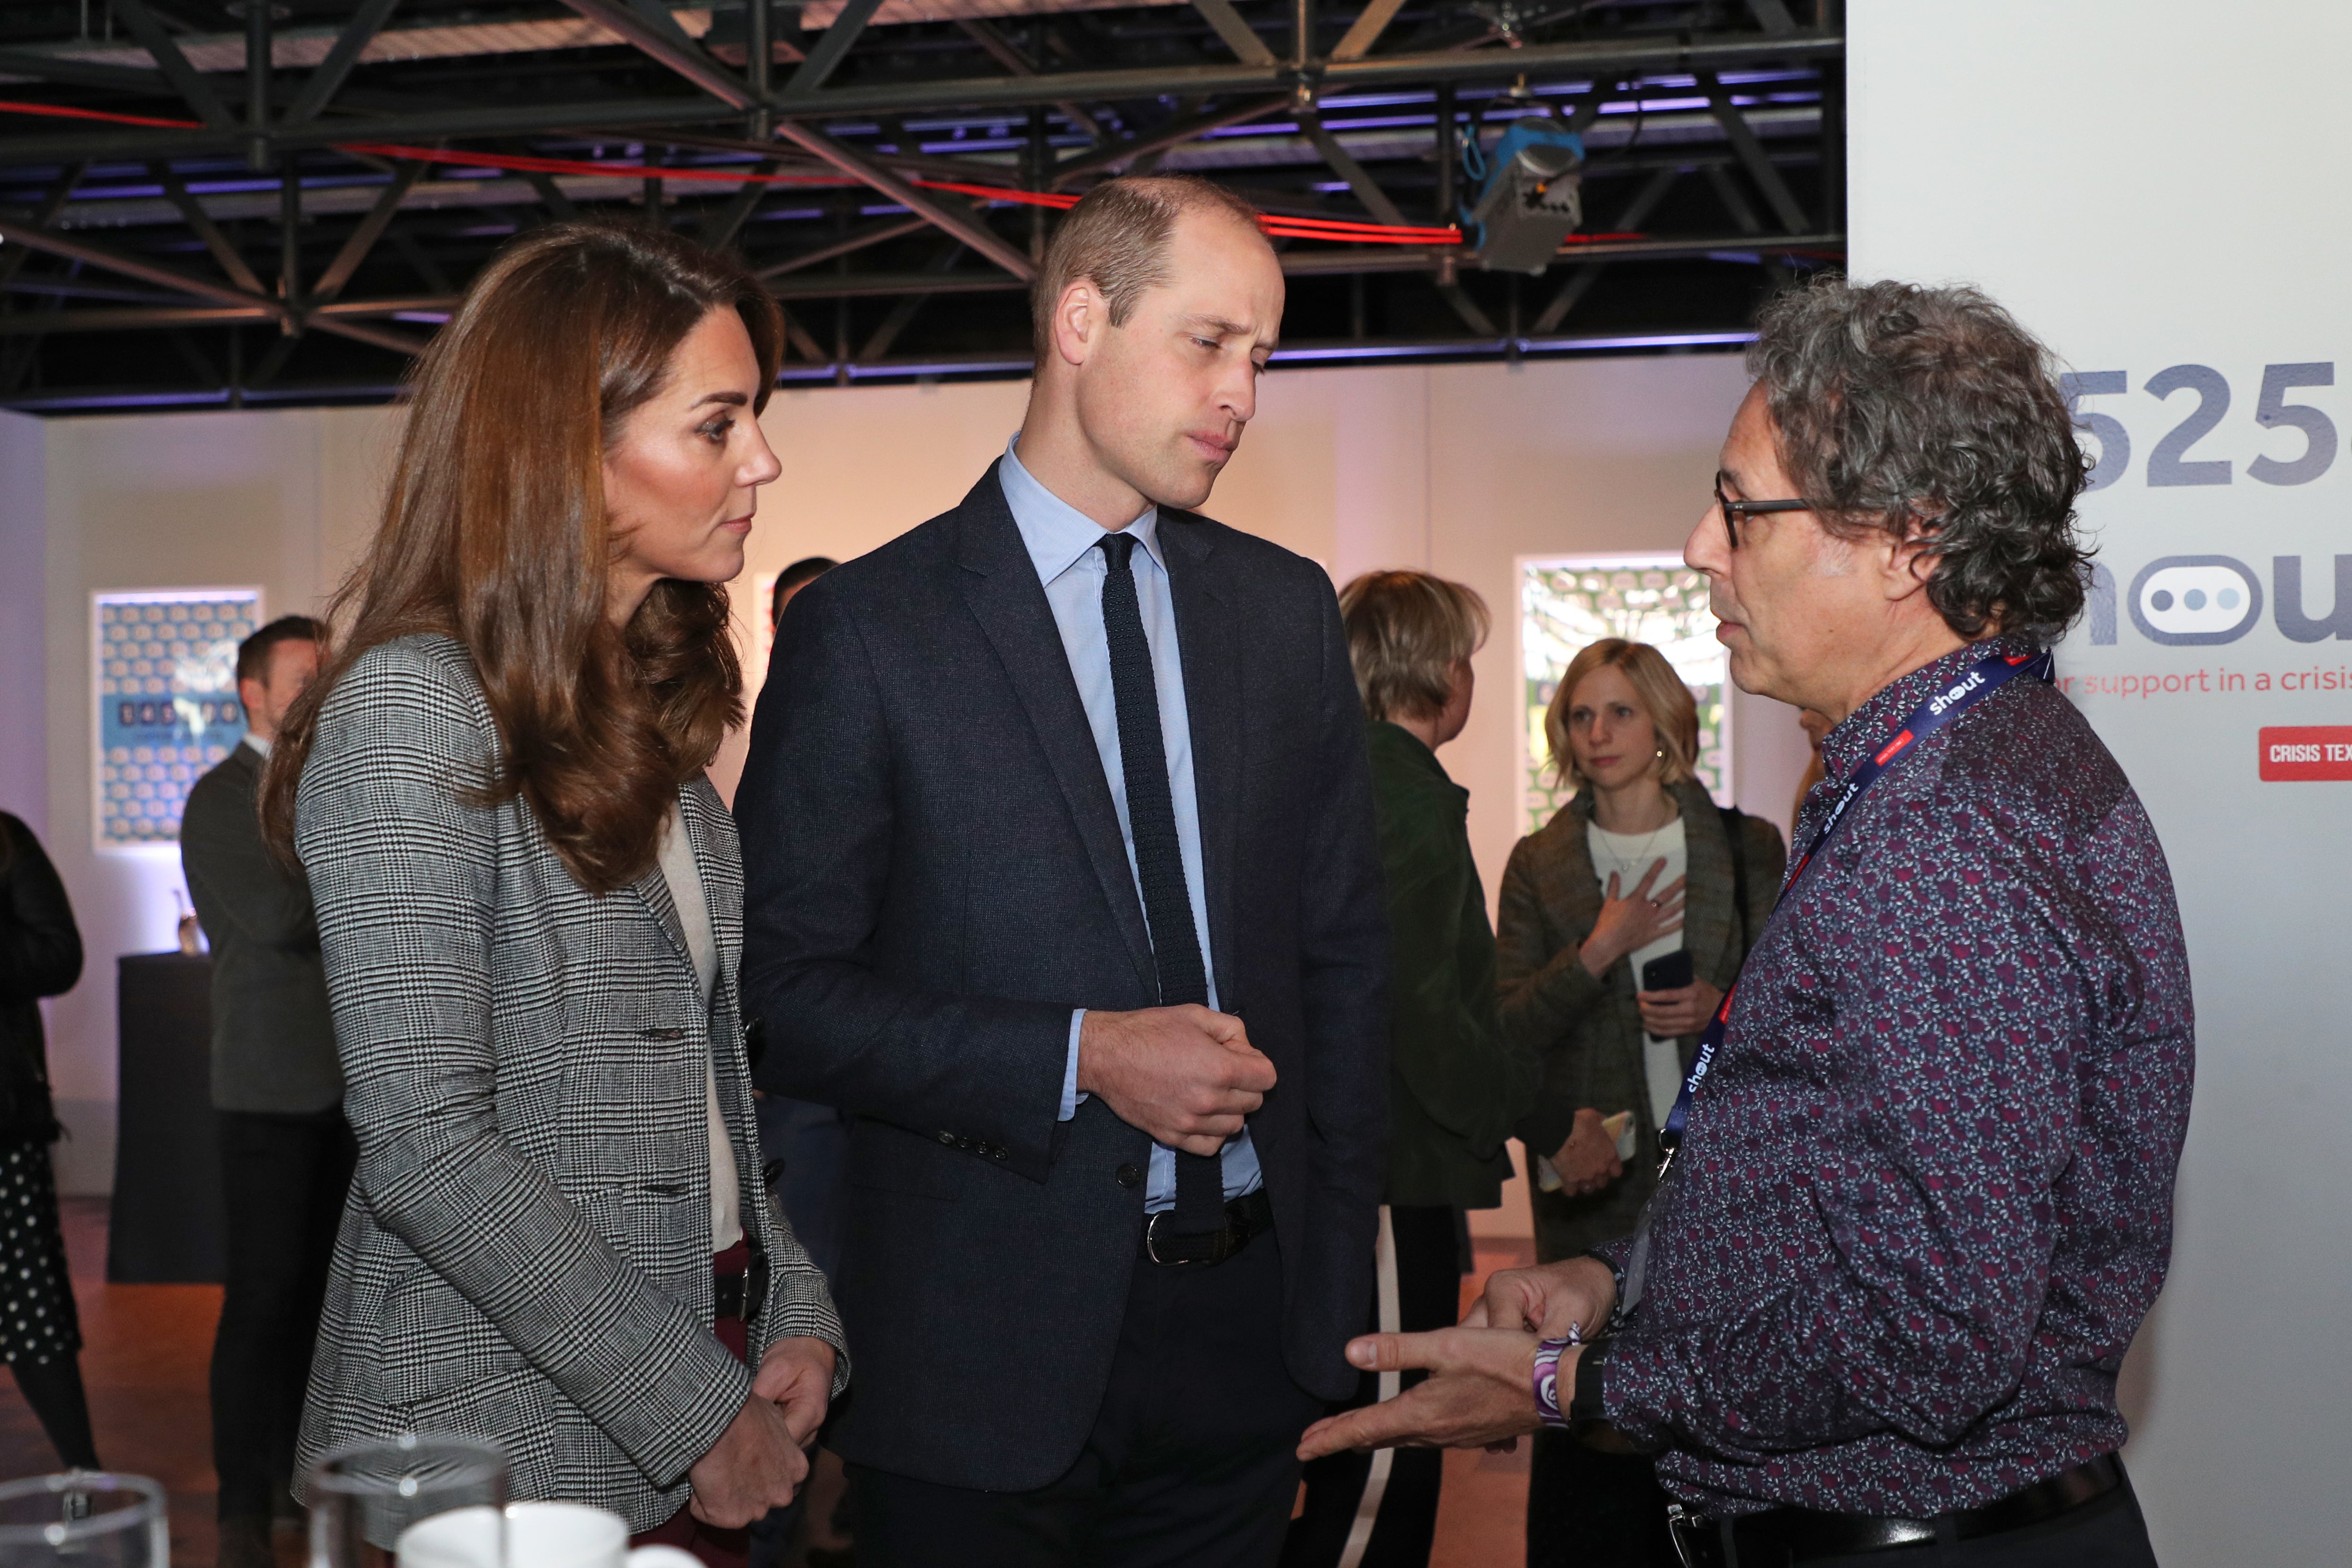 Ian Russell, right, the father of Molly Russell, with the Duke and Duchess of Cambridge, has campaigned about child safety